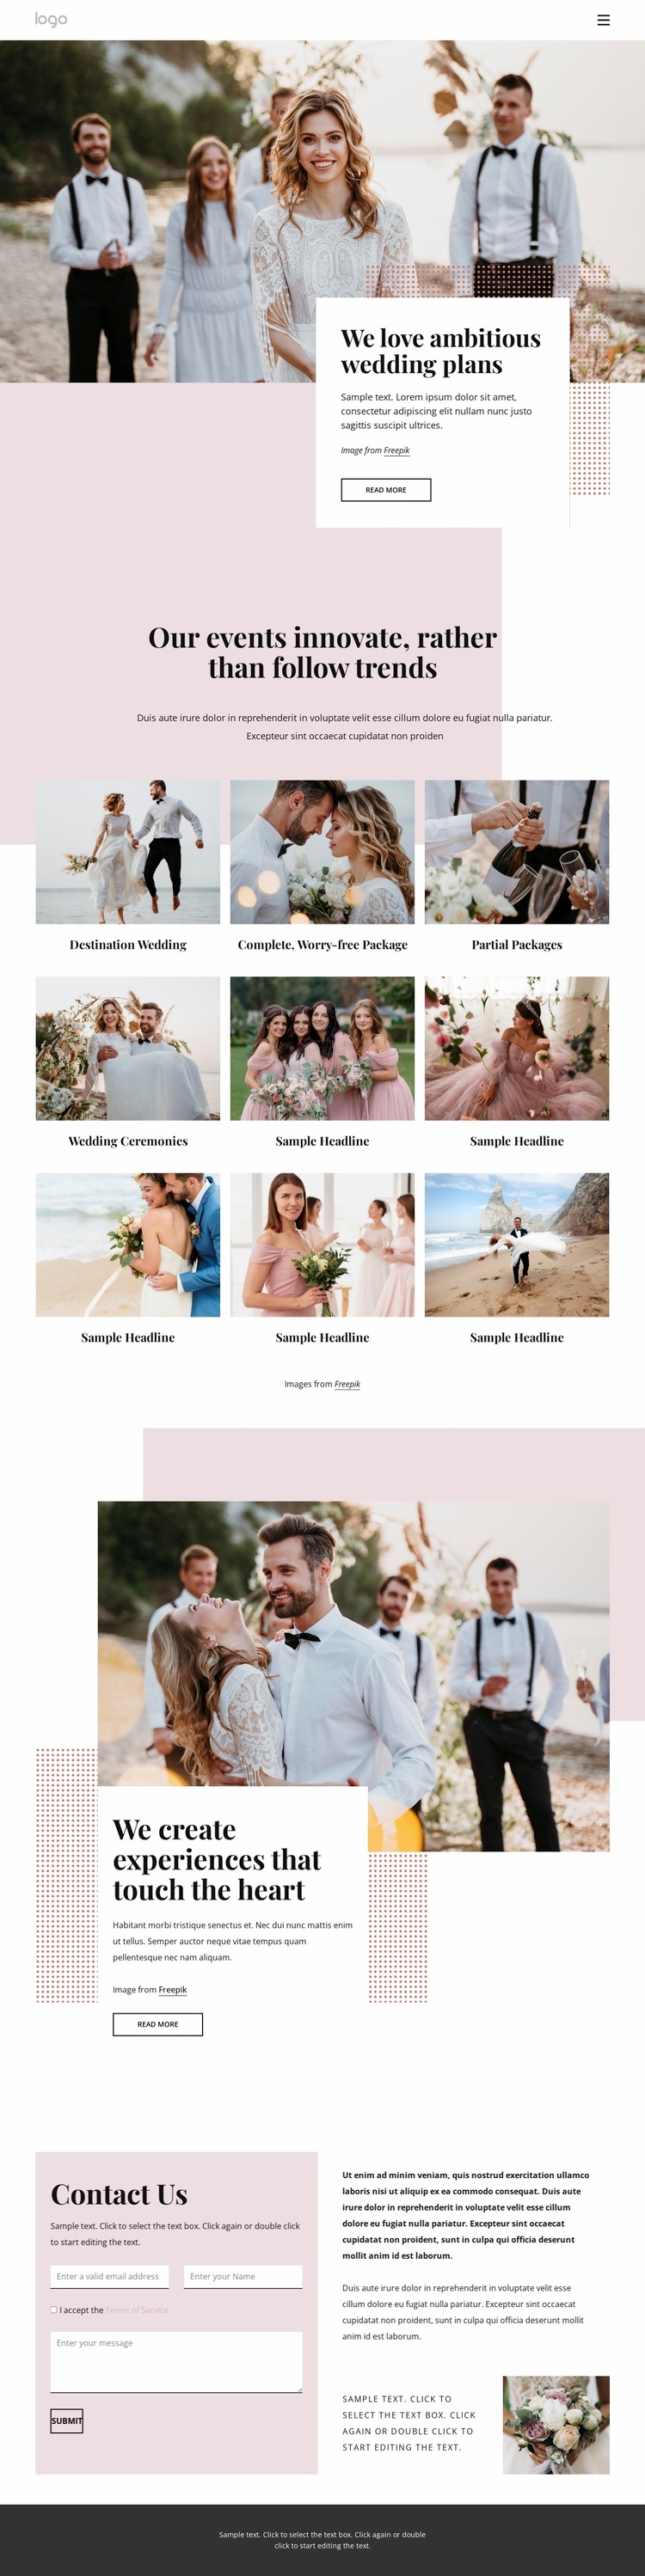 We love ambitious wedding plans eCommerce Template